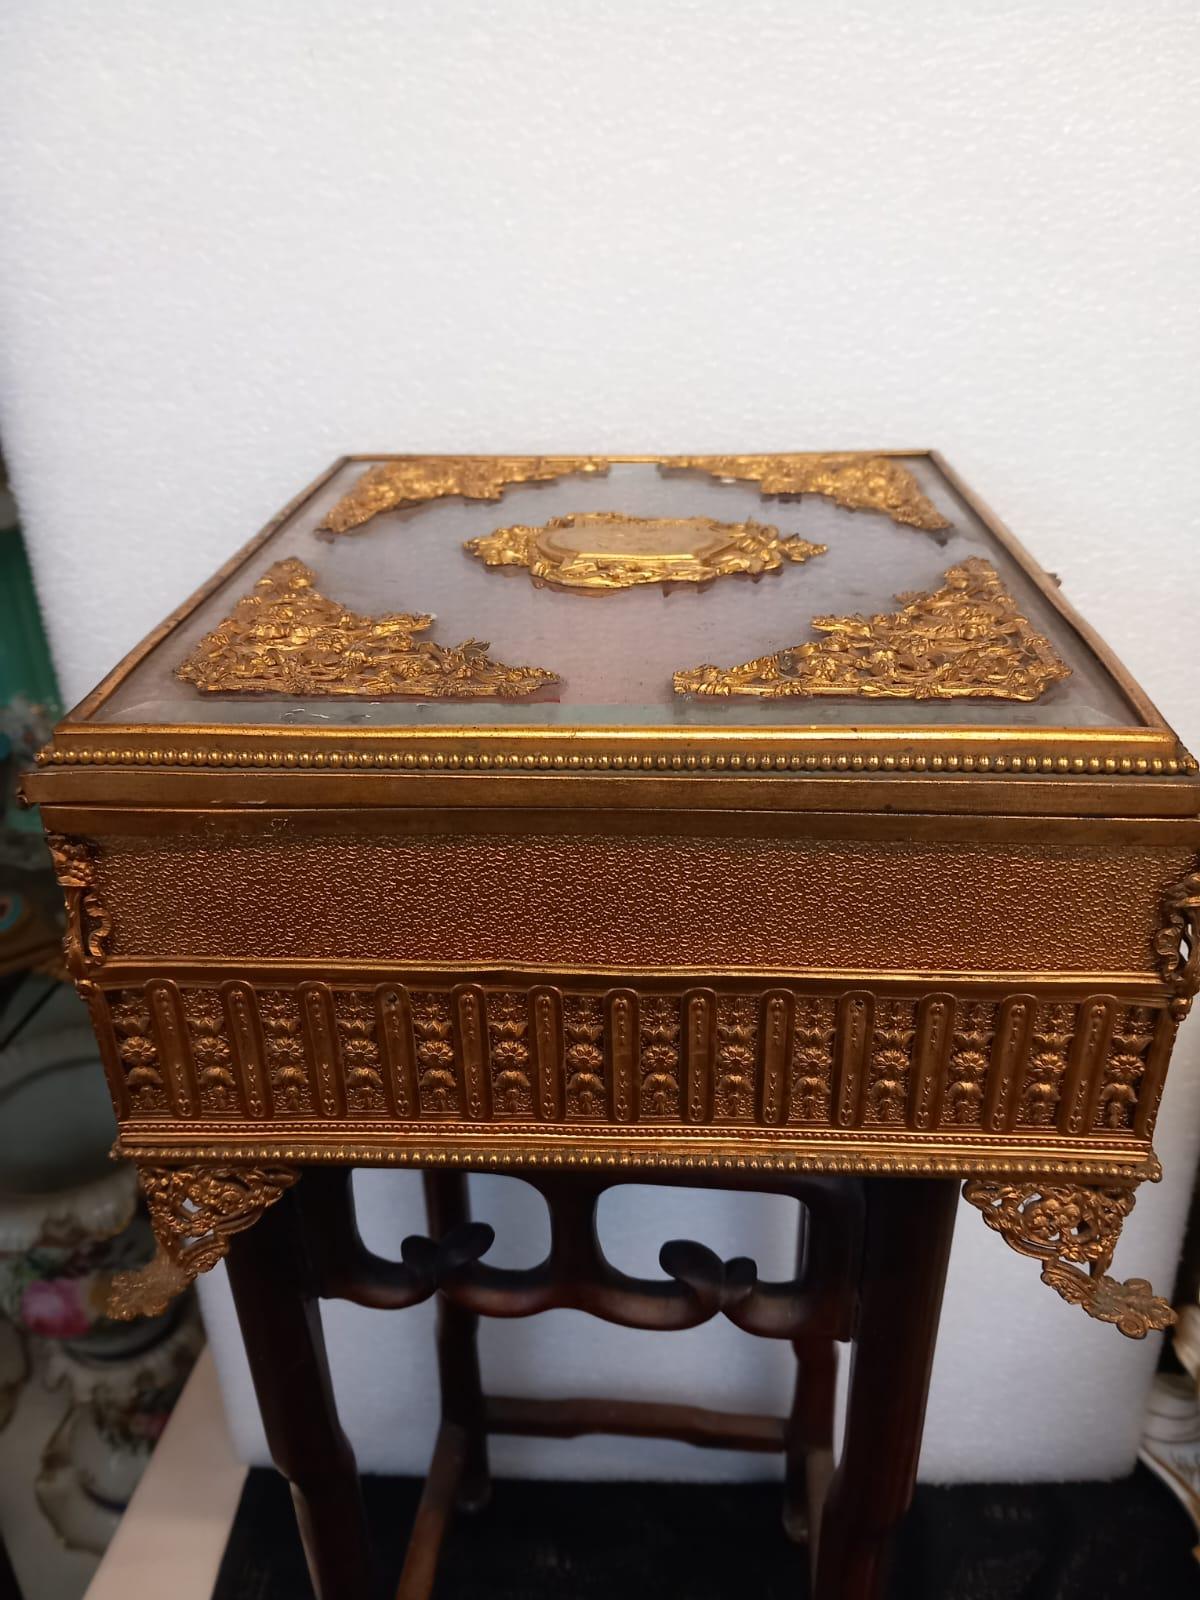 Palais Royal gilt bronze and mother of pearl jewellery casket or trinket box For Sale 8